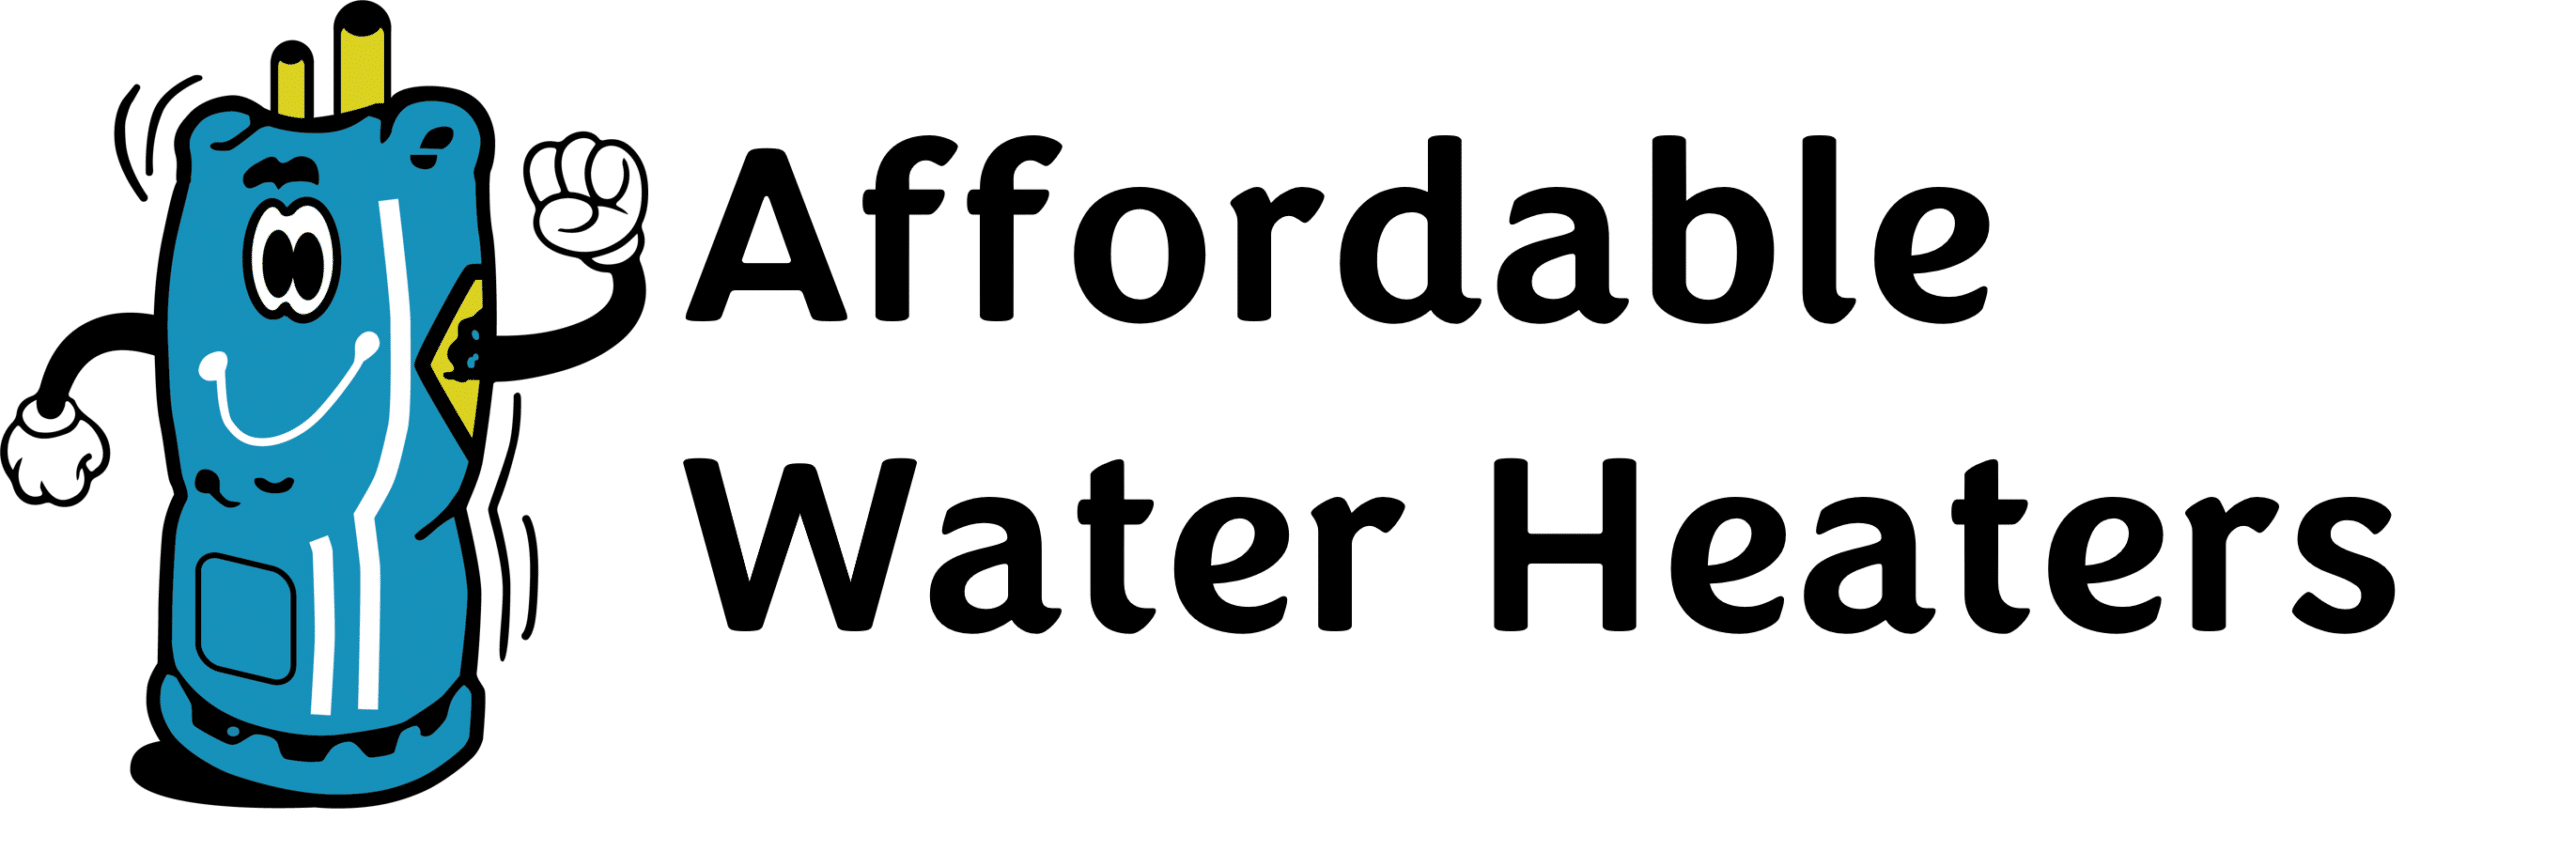 Image of the Affordable Water Heaters Logo with animated water heater.